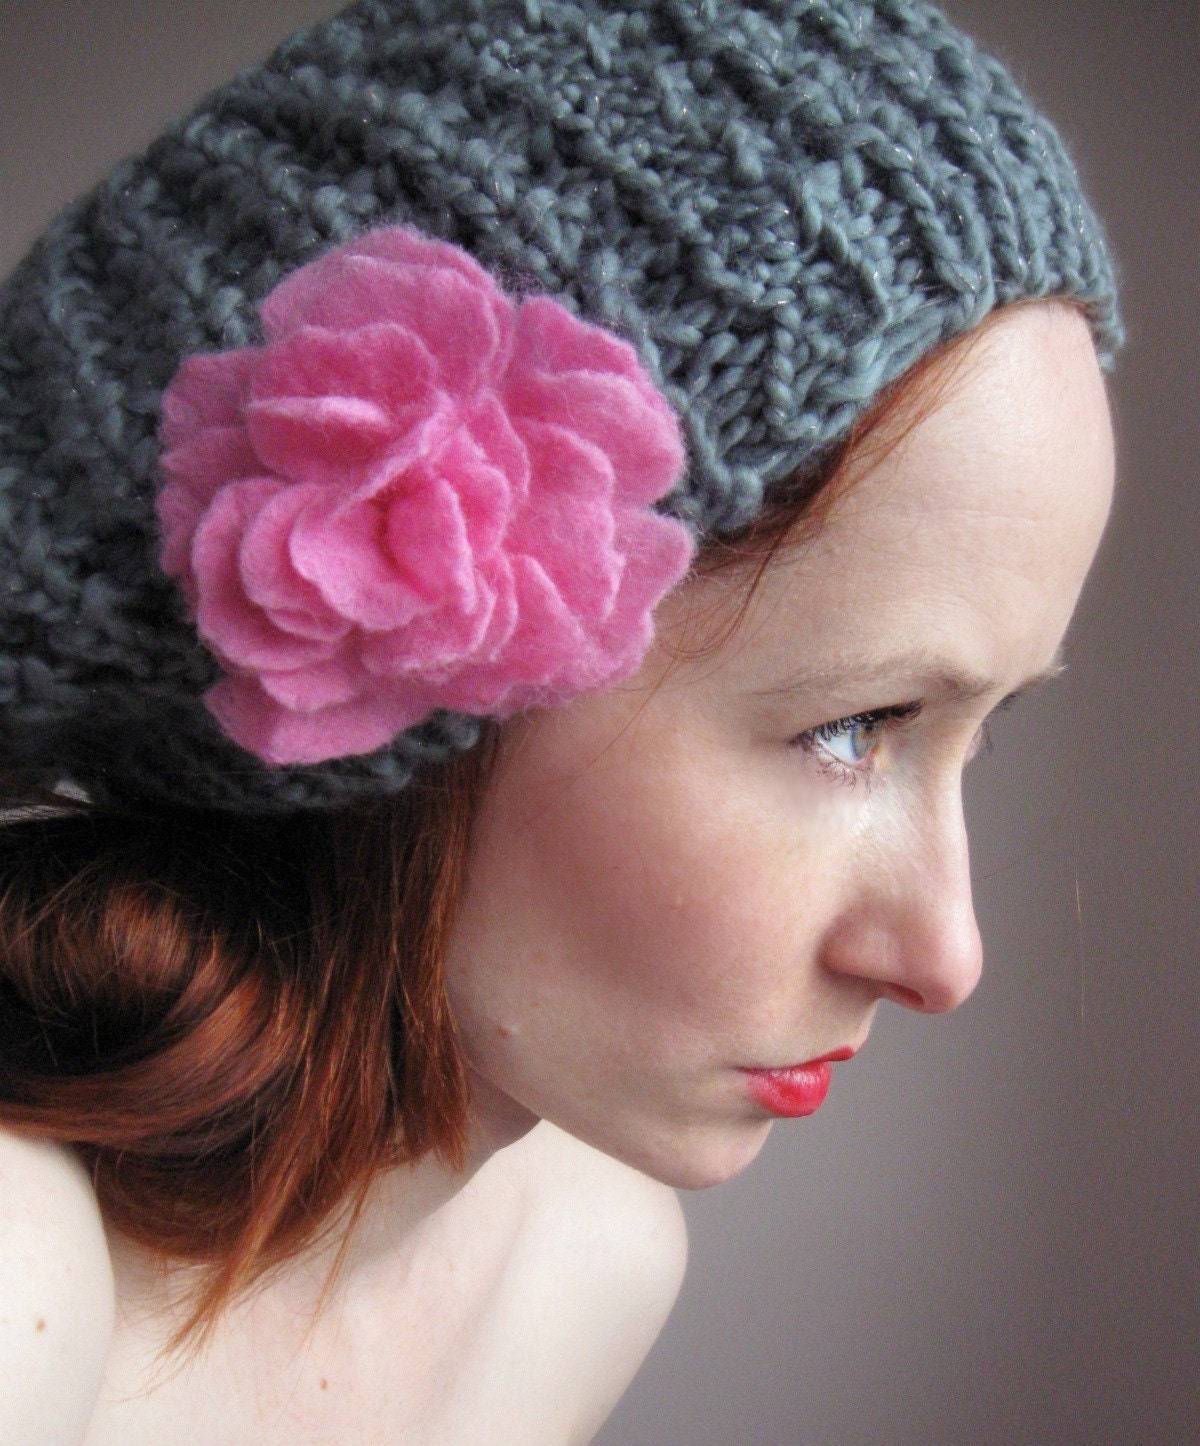 15 % 
OFF SALE Dark Grey Knit Beret With Pink Rose Hand felted